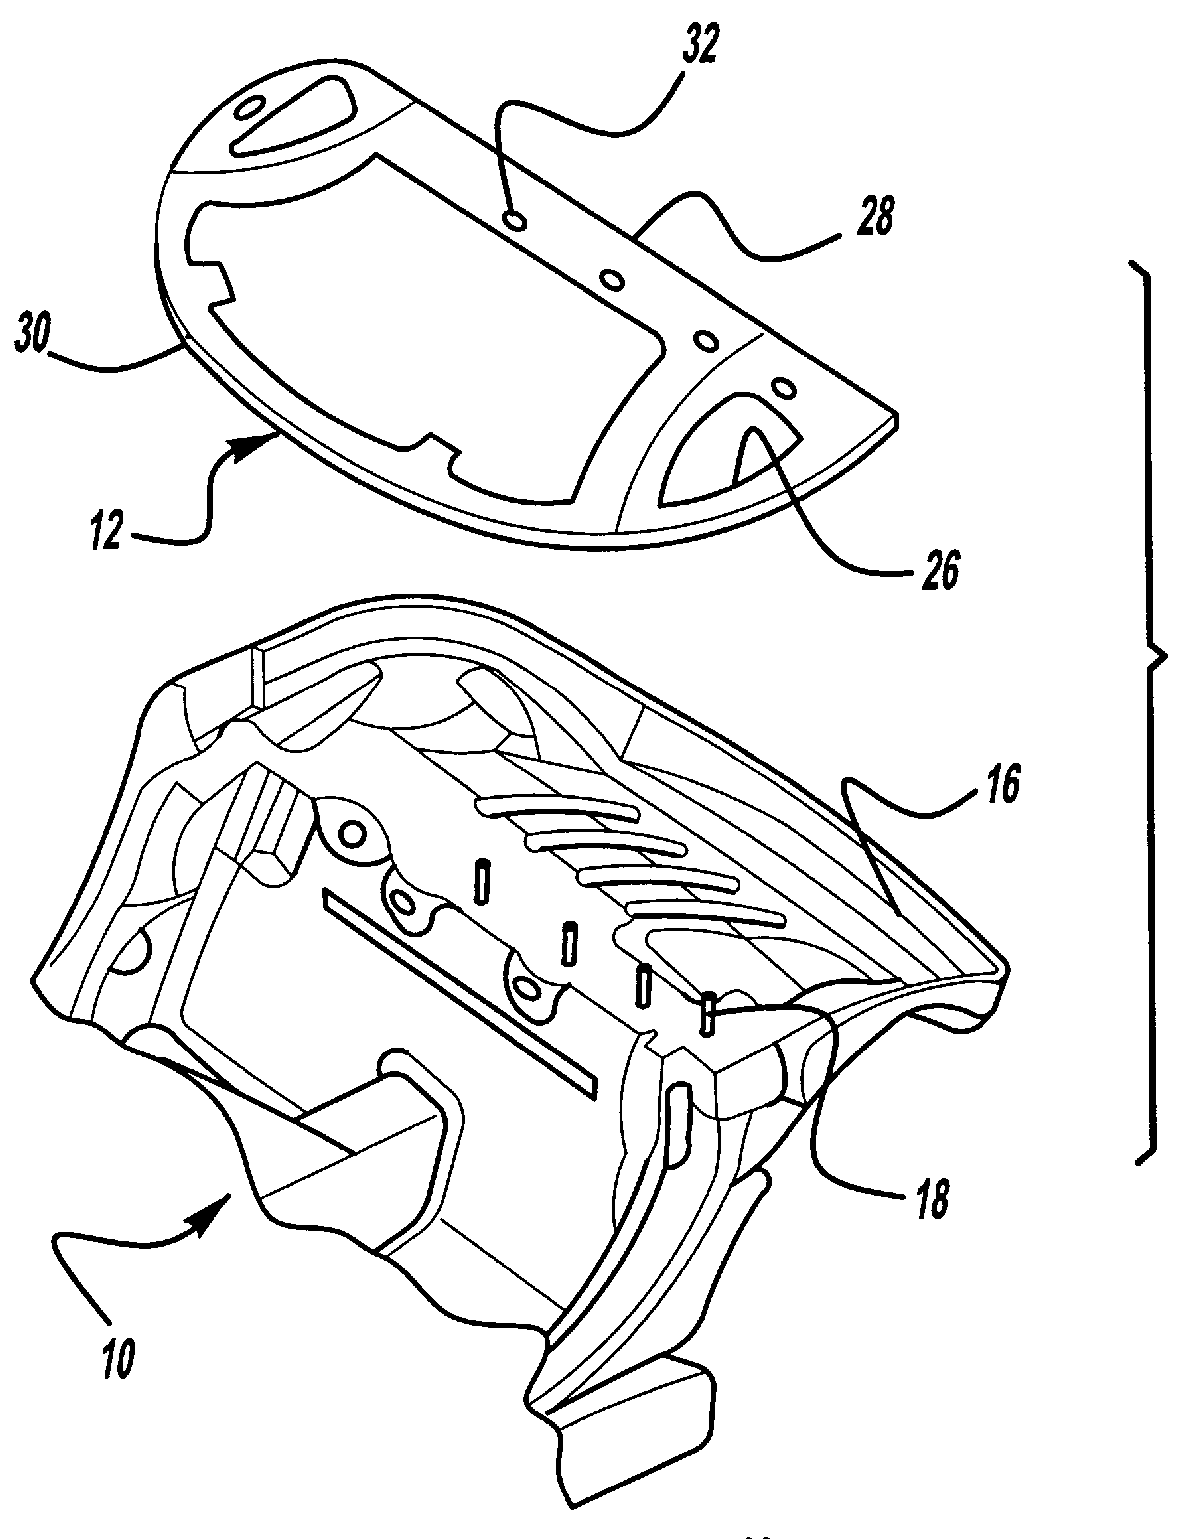 Method of installing a carpet member within a motor vehicle